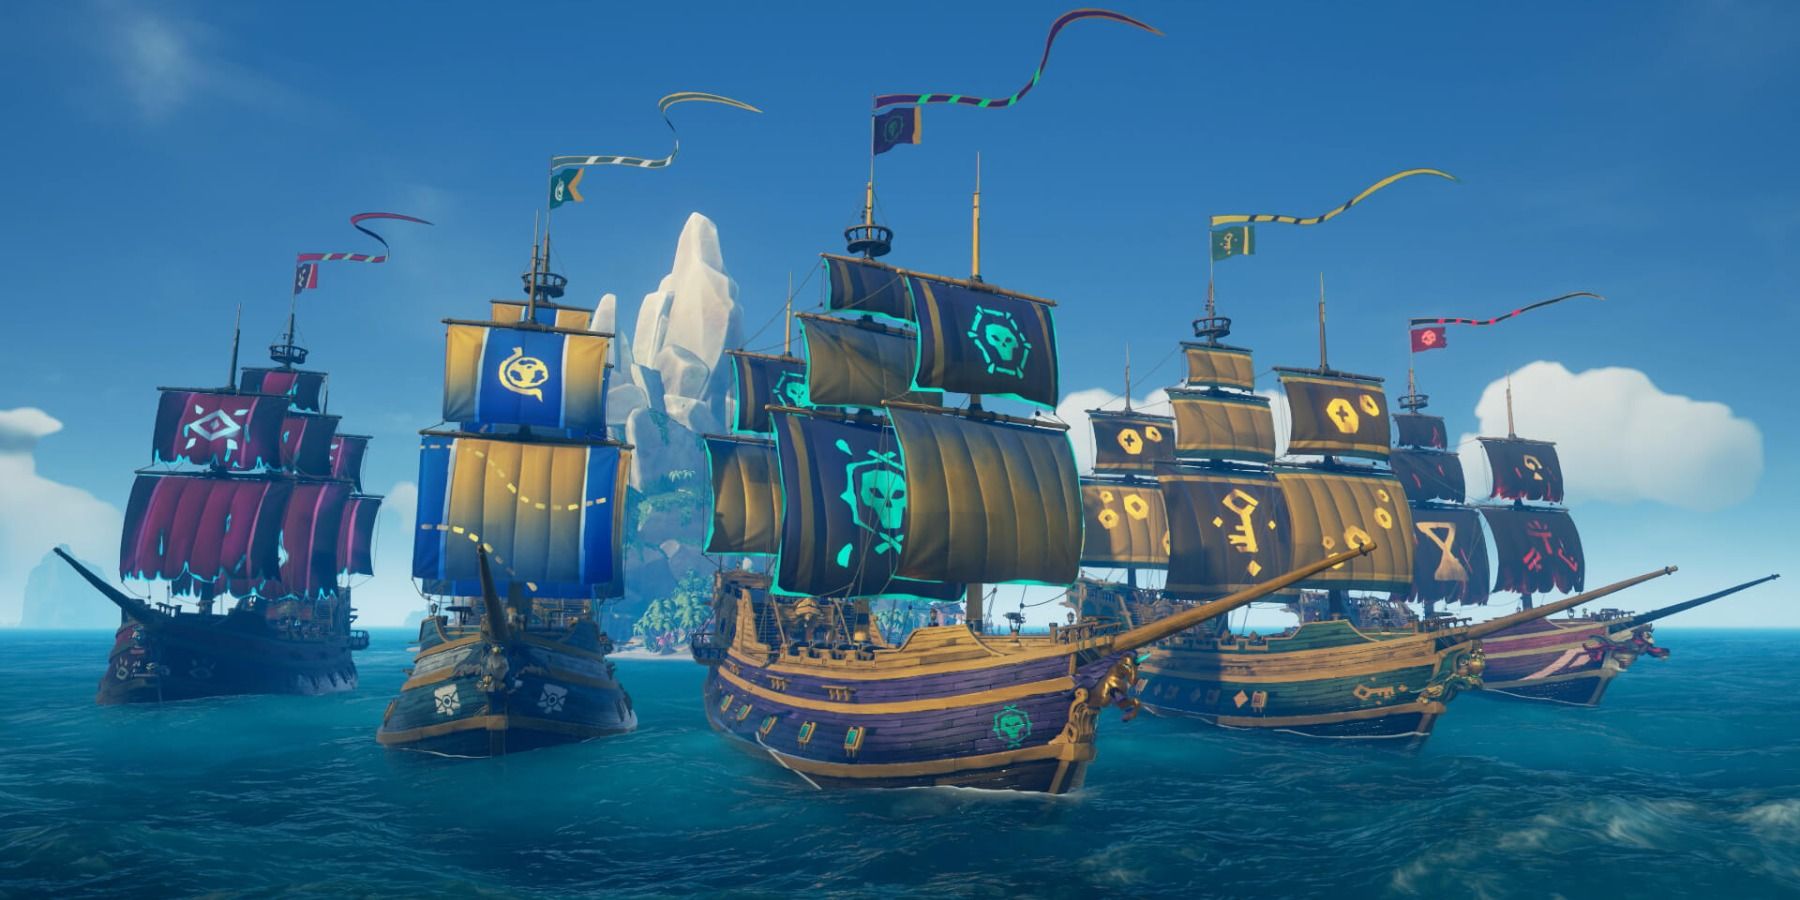 Sea Of Thieves Emissary Flags on ships